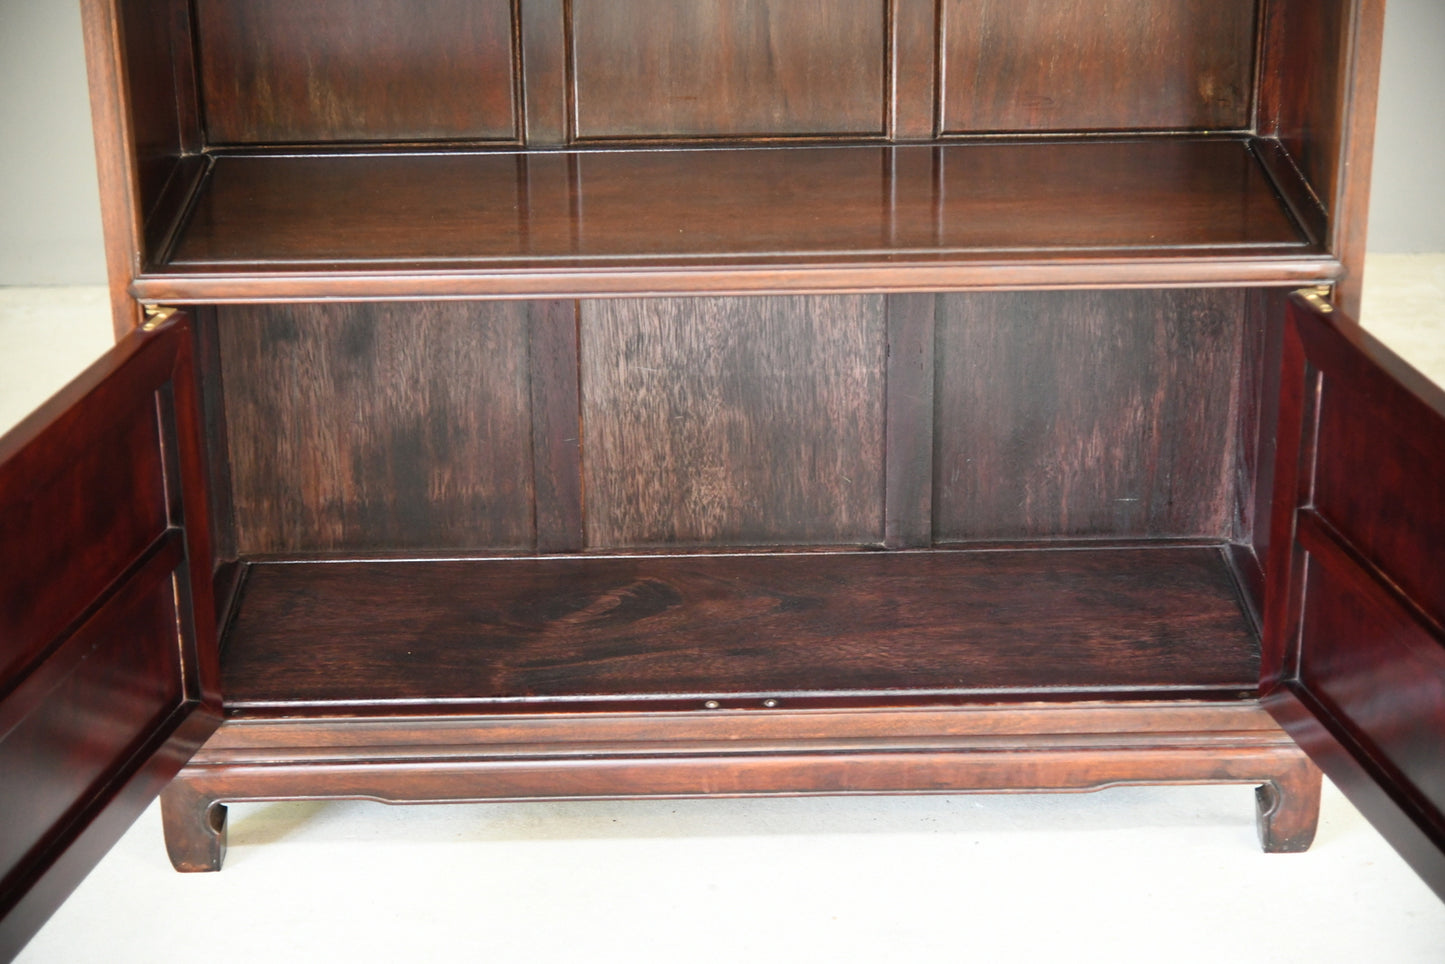 Chinese Rosewood Bookcase